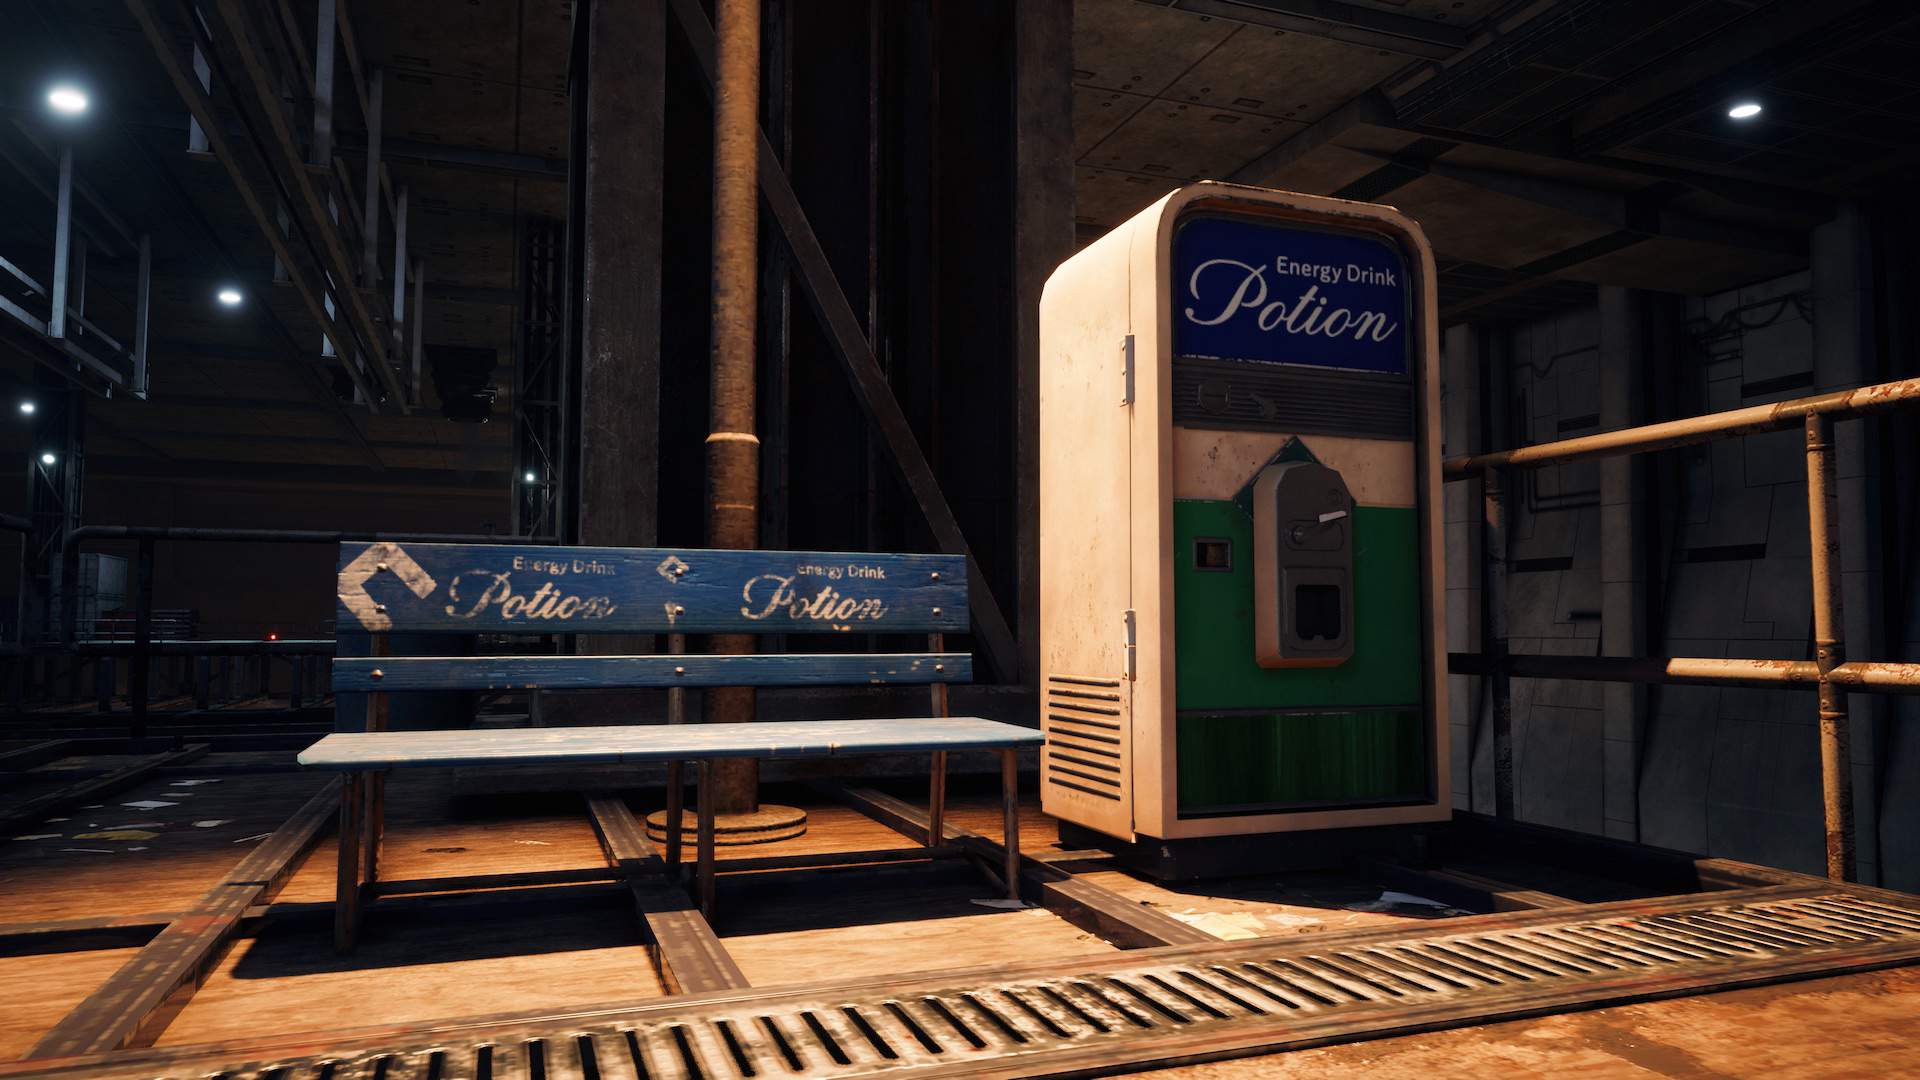 A bench and vending machine from FINAL FANTASY VII REMAKE